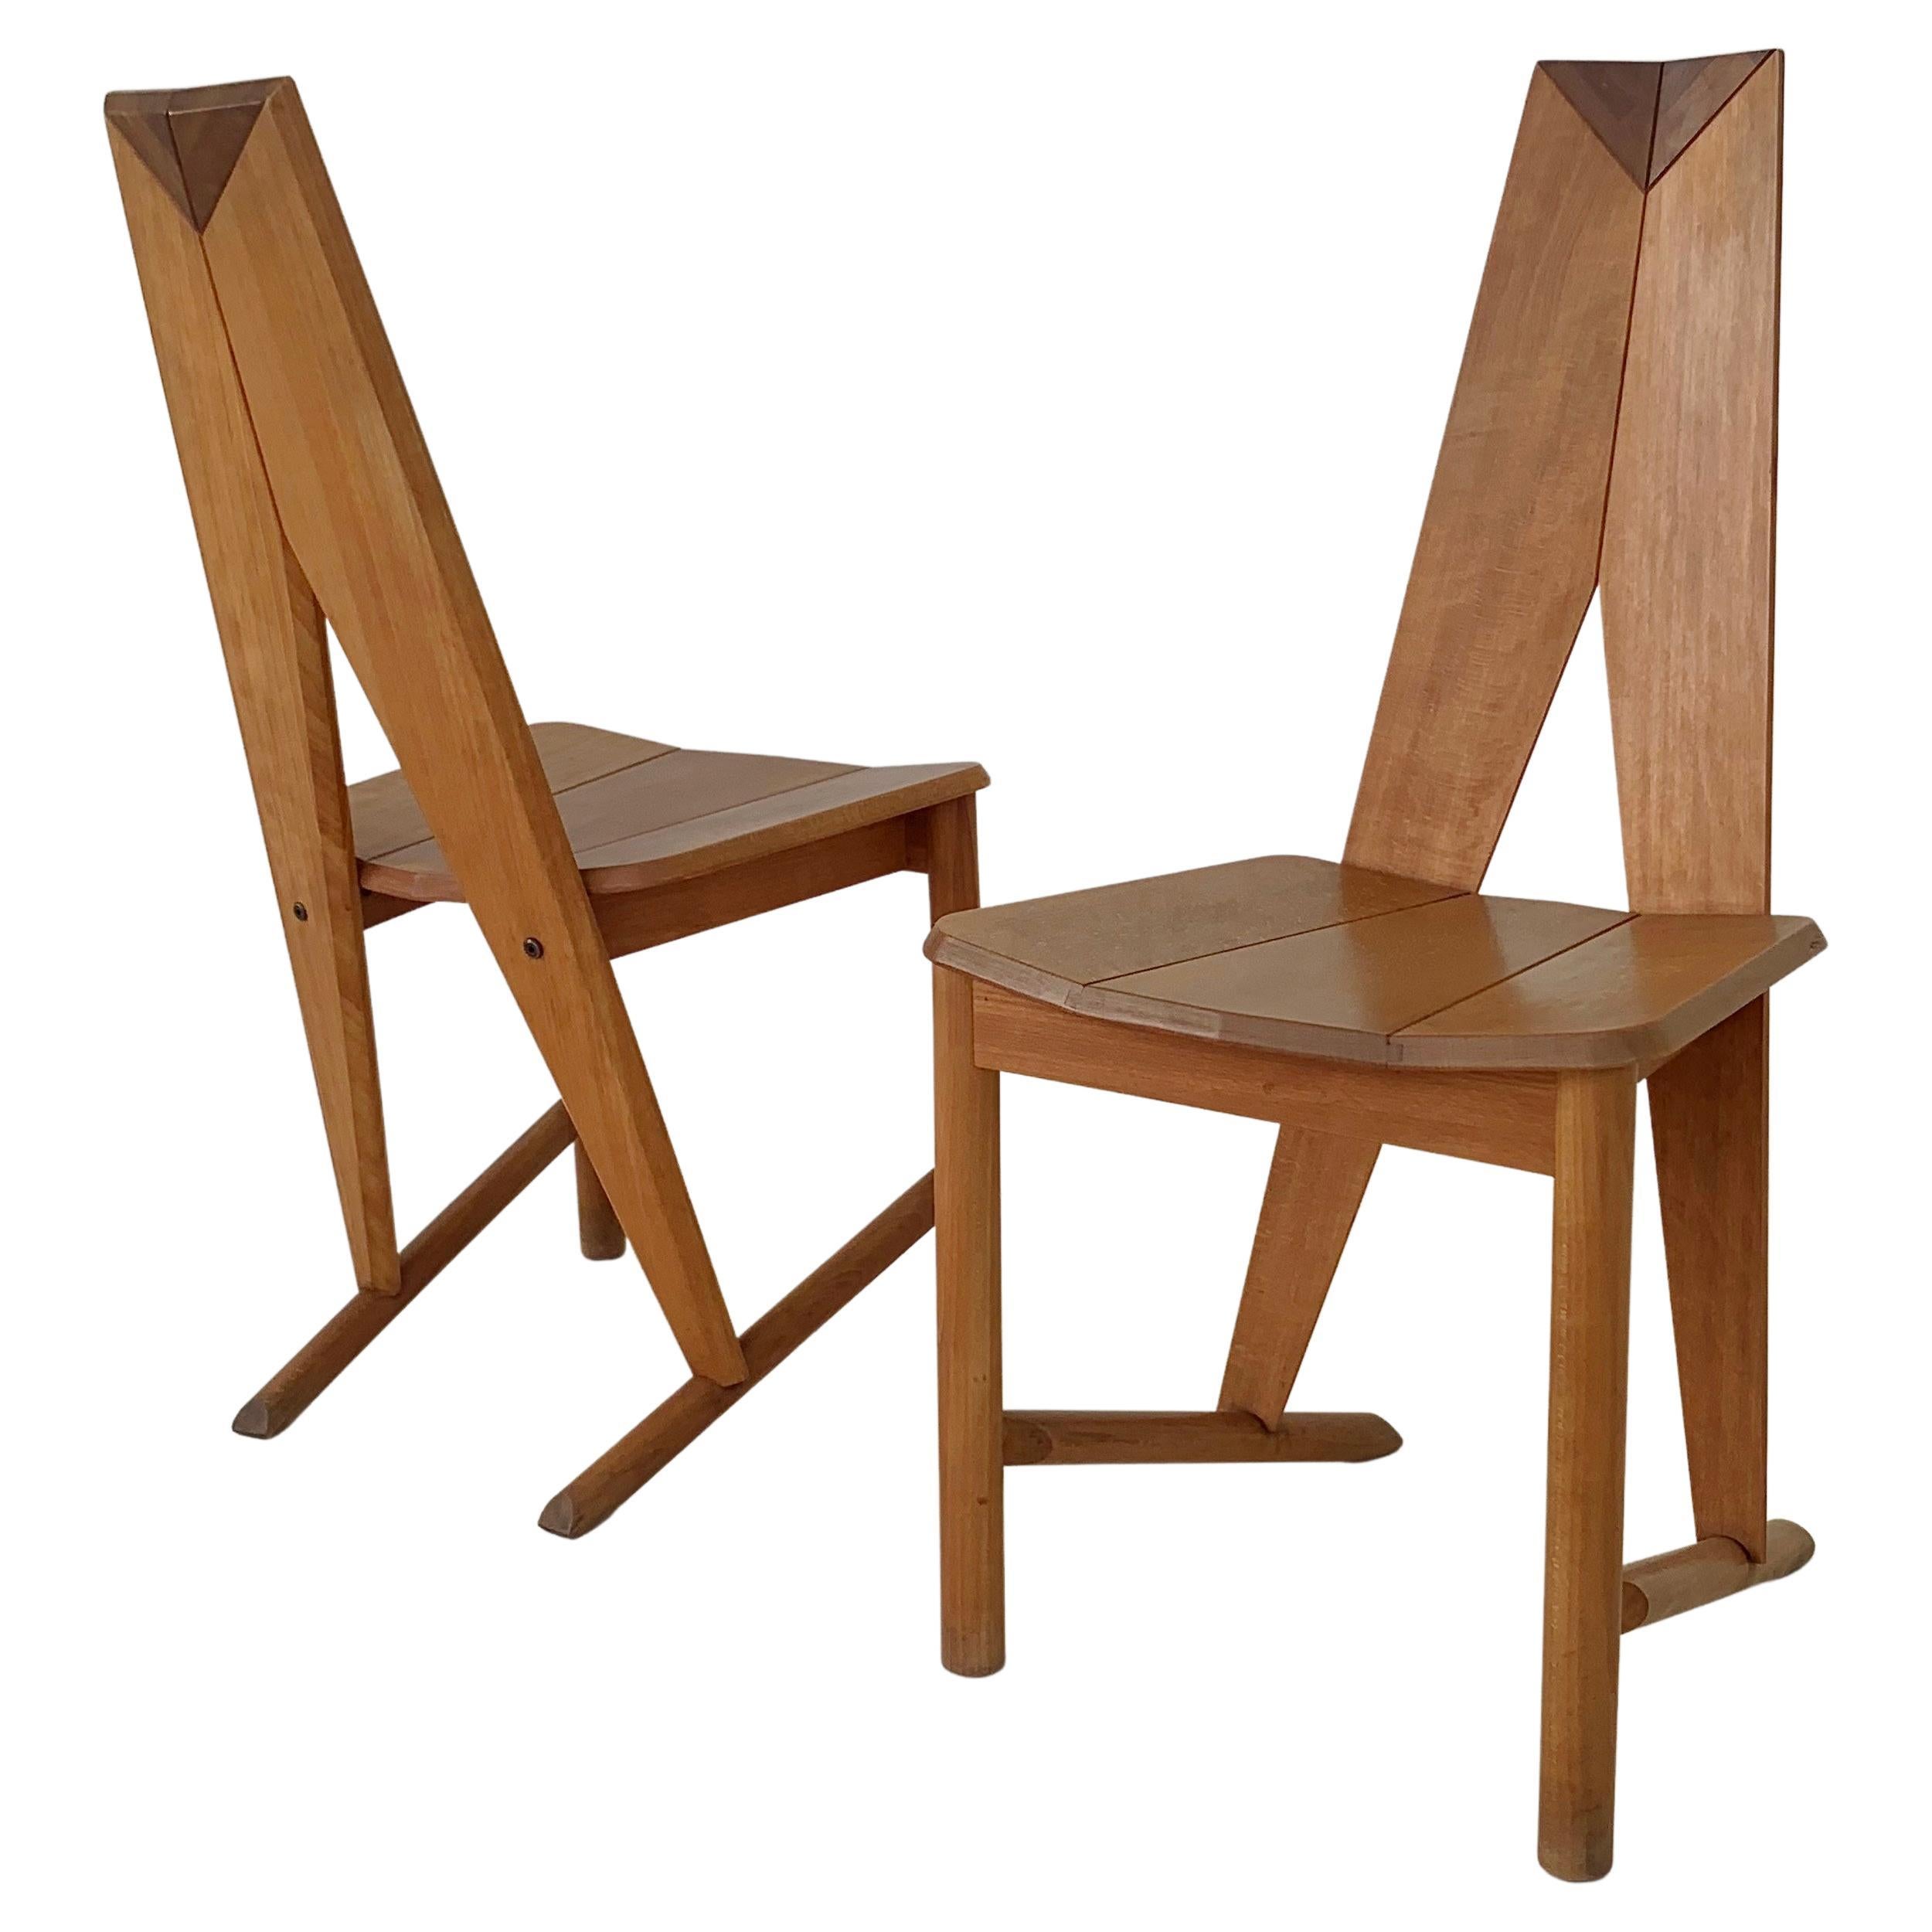  Pair of FCH1A Dining Chairs Edited By Seltz, circa 1980, France.